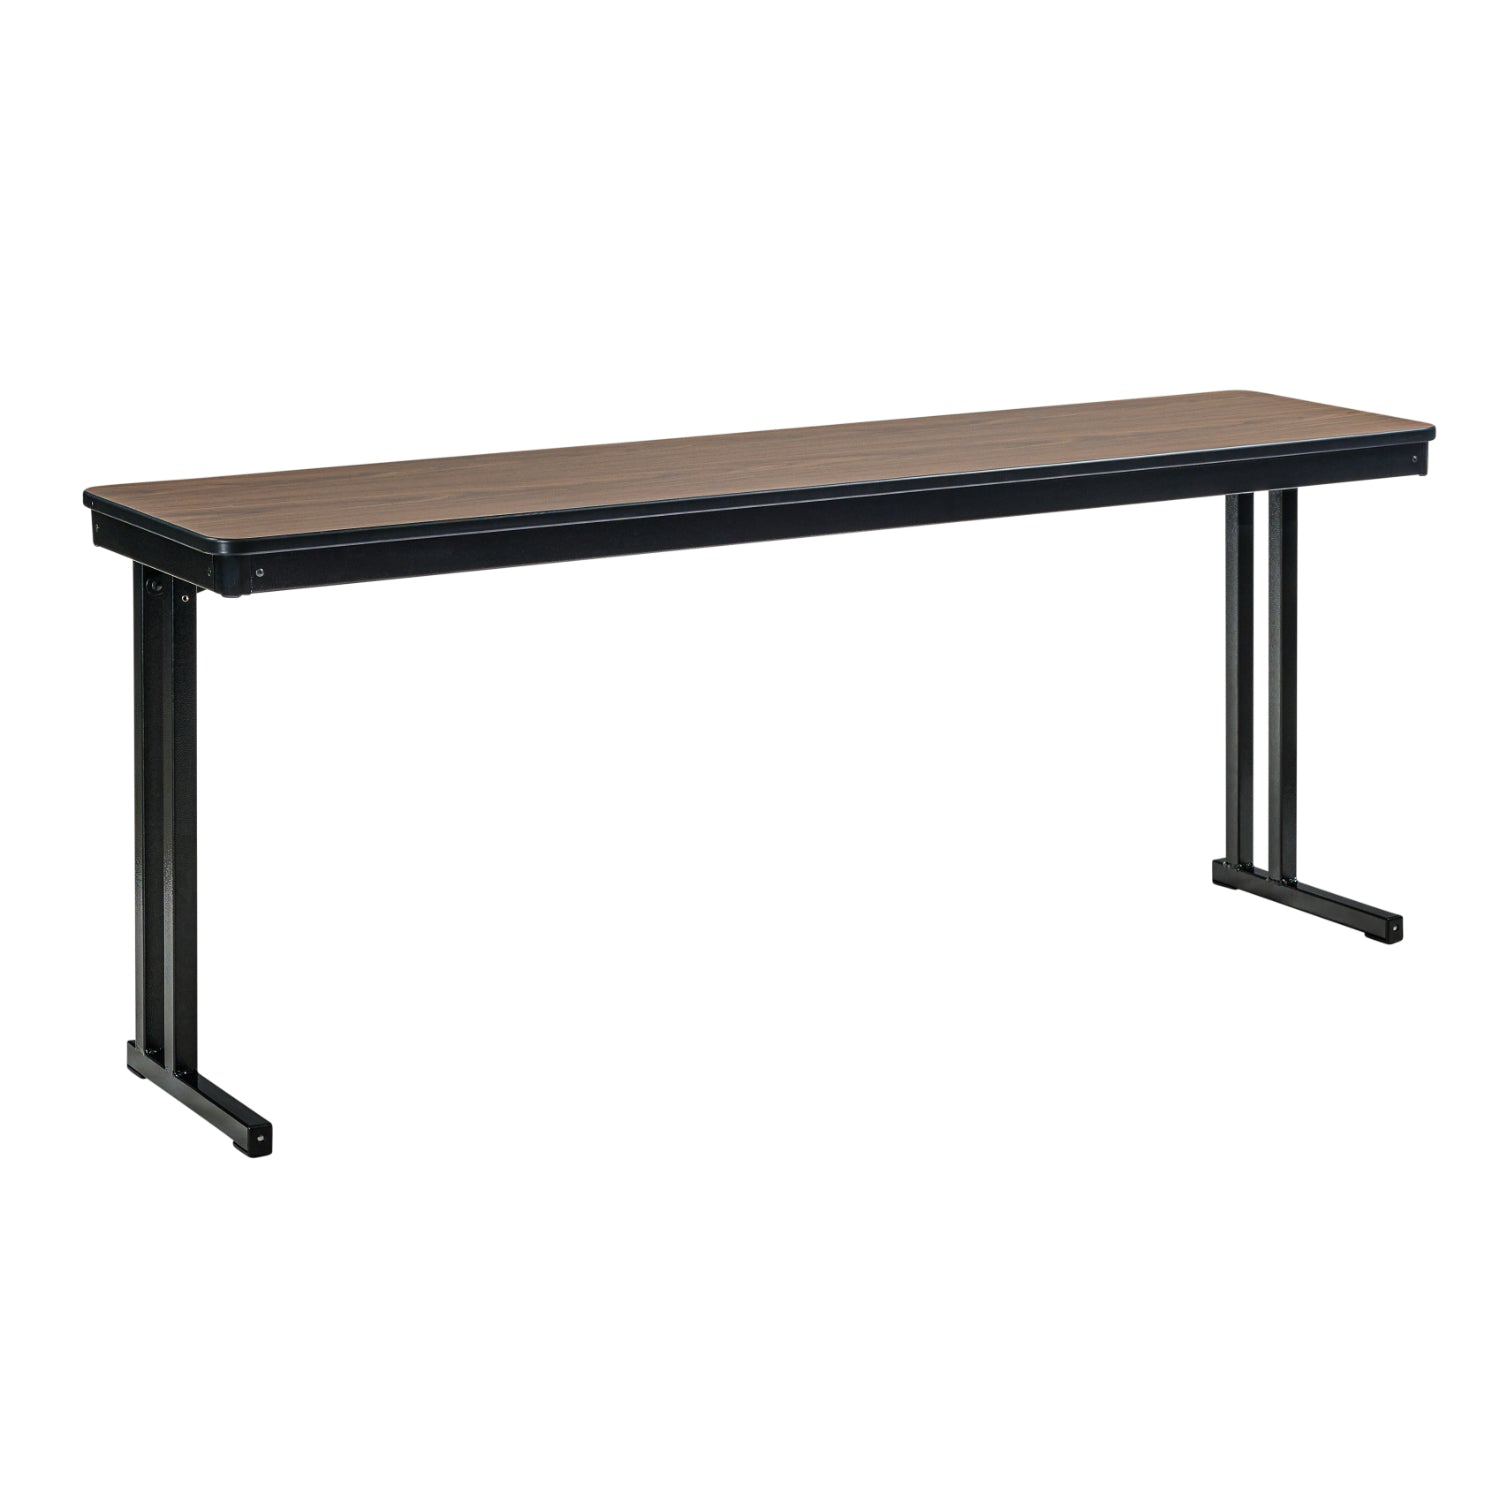 Max Seating Folding Training and Seminar Table with Cantilever Legs, 18" x 72", High Pressure Laminate Top with Plywood Core/T-Mold Edge